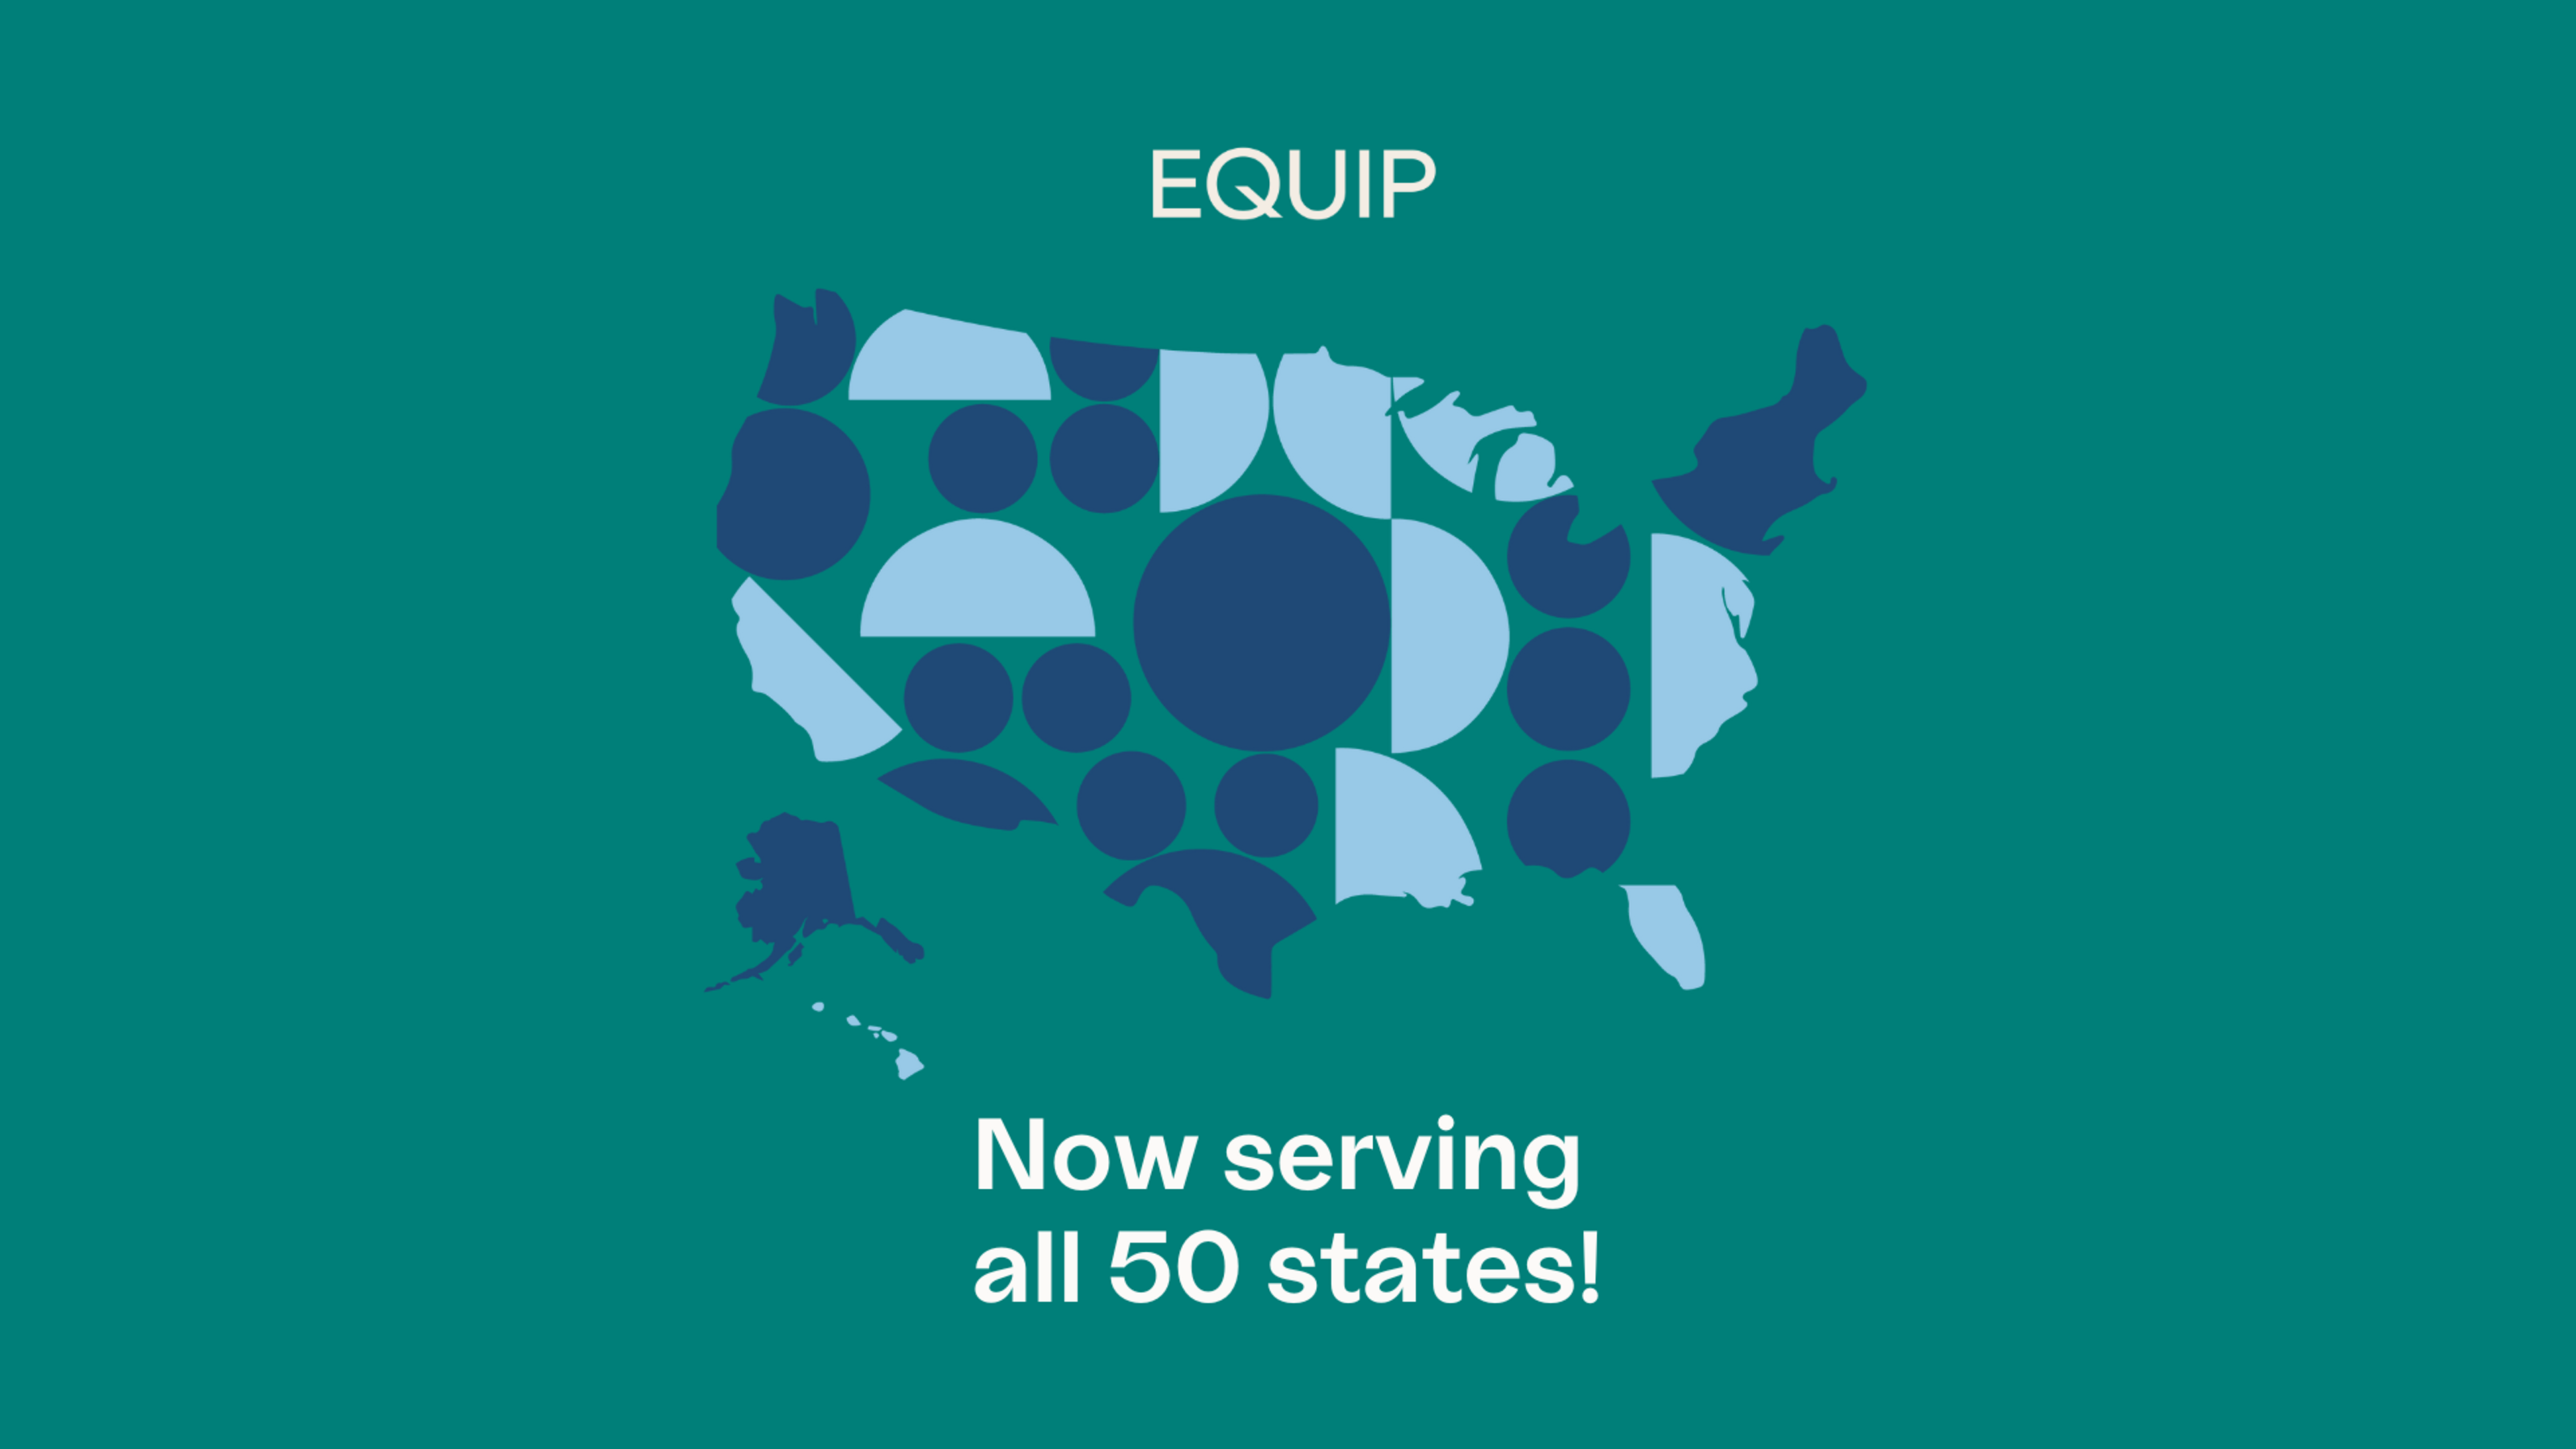 A stylized map of the U.S. with the Equip logo and the texts "Now serving all 50 states!"